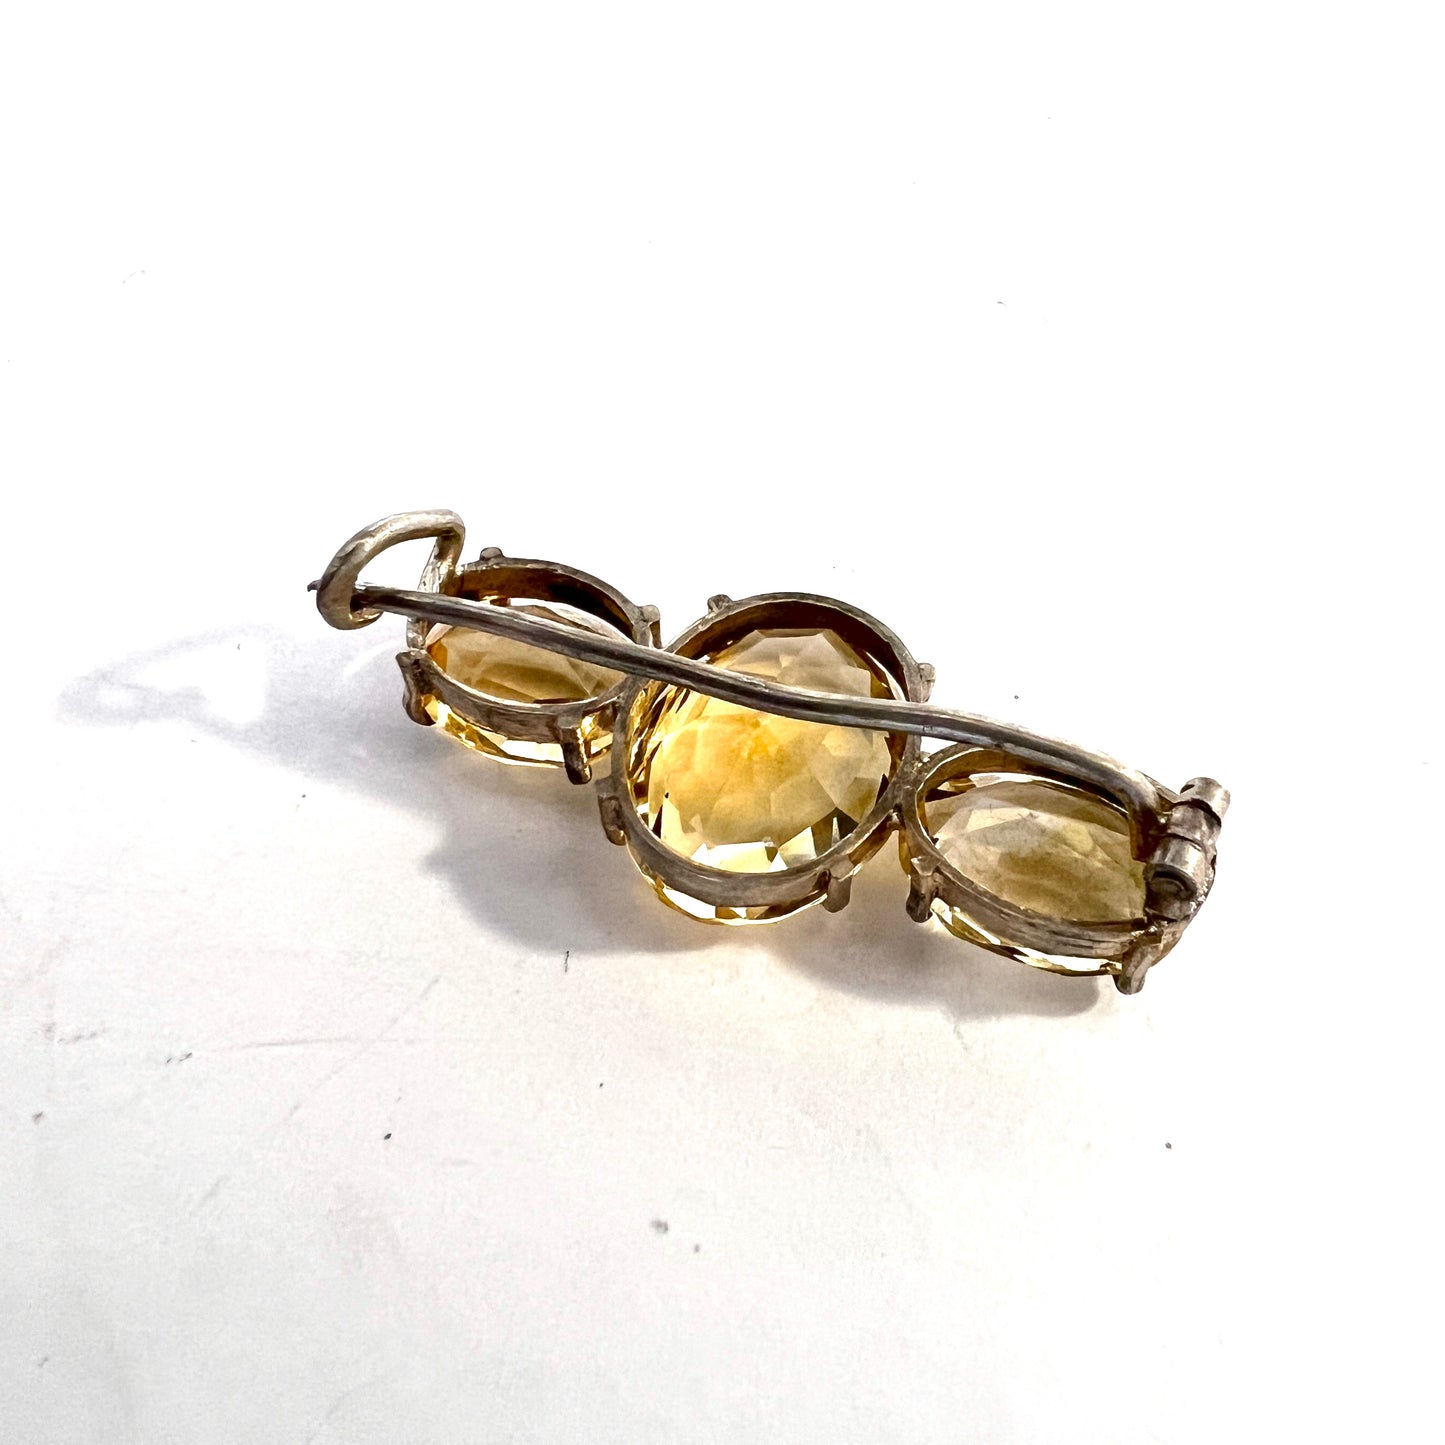 Sweden. Antique early 1900s. Solid Silver Citrine Brooch.